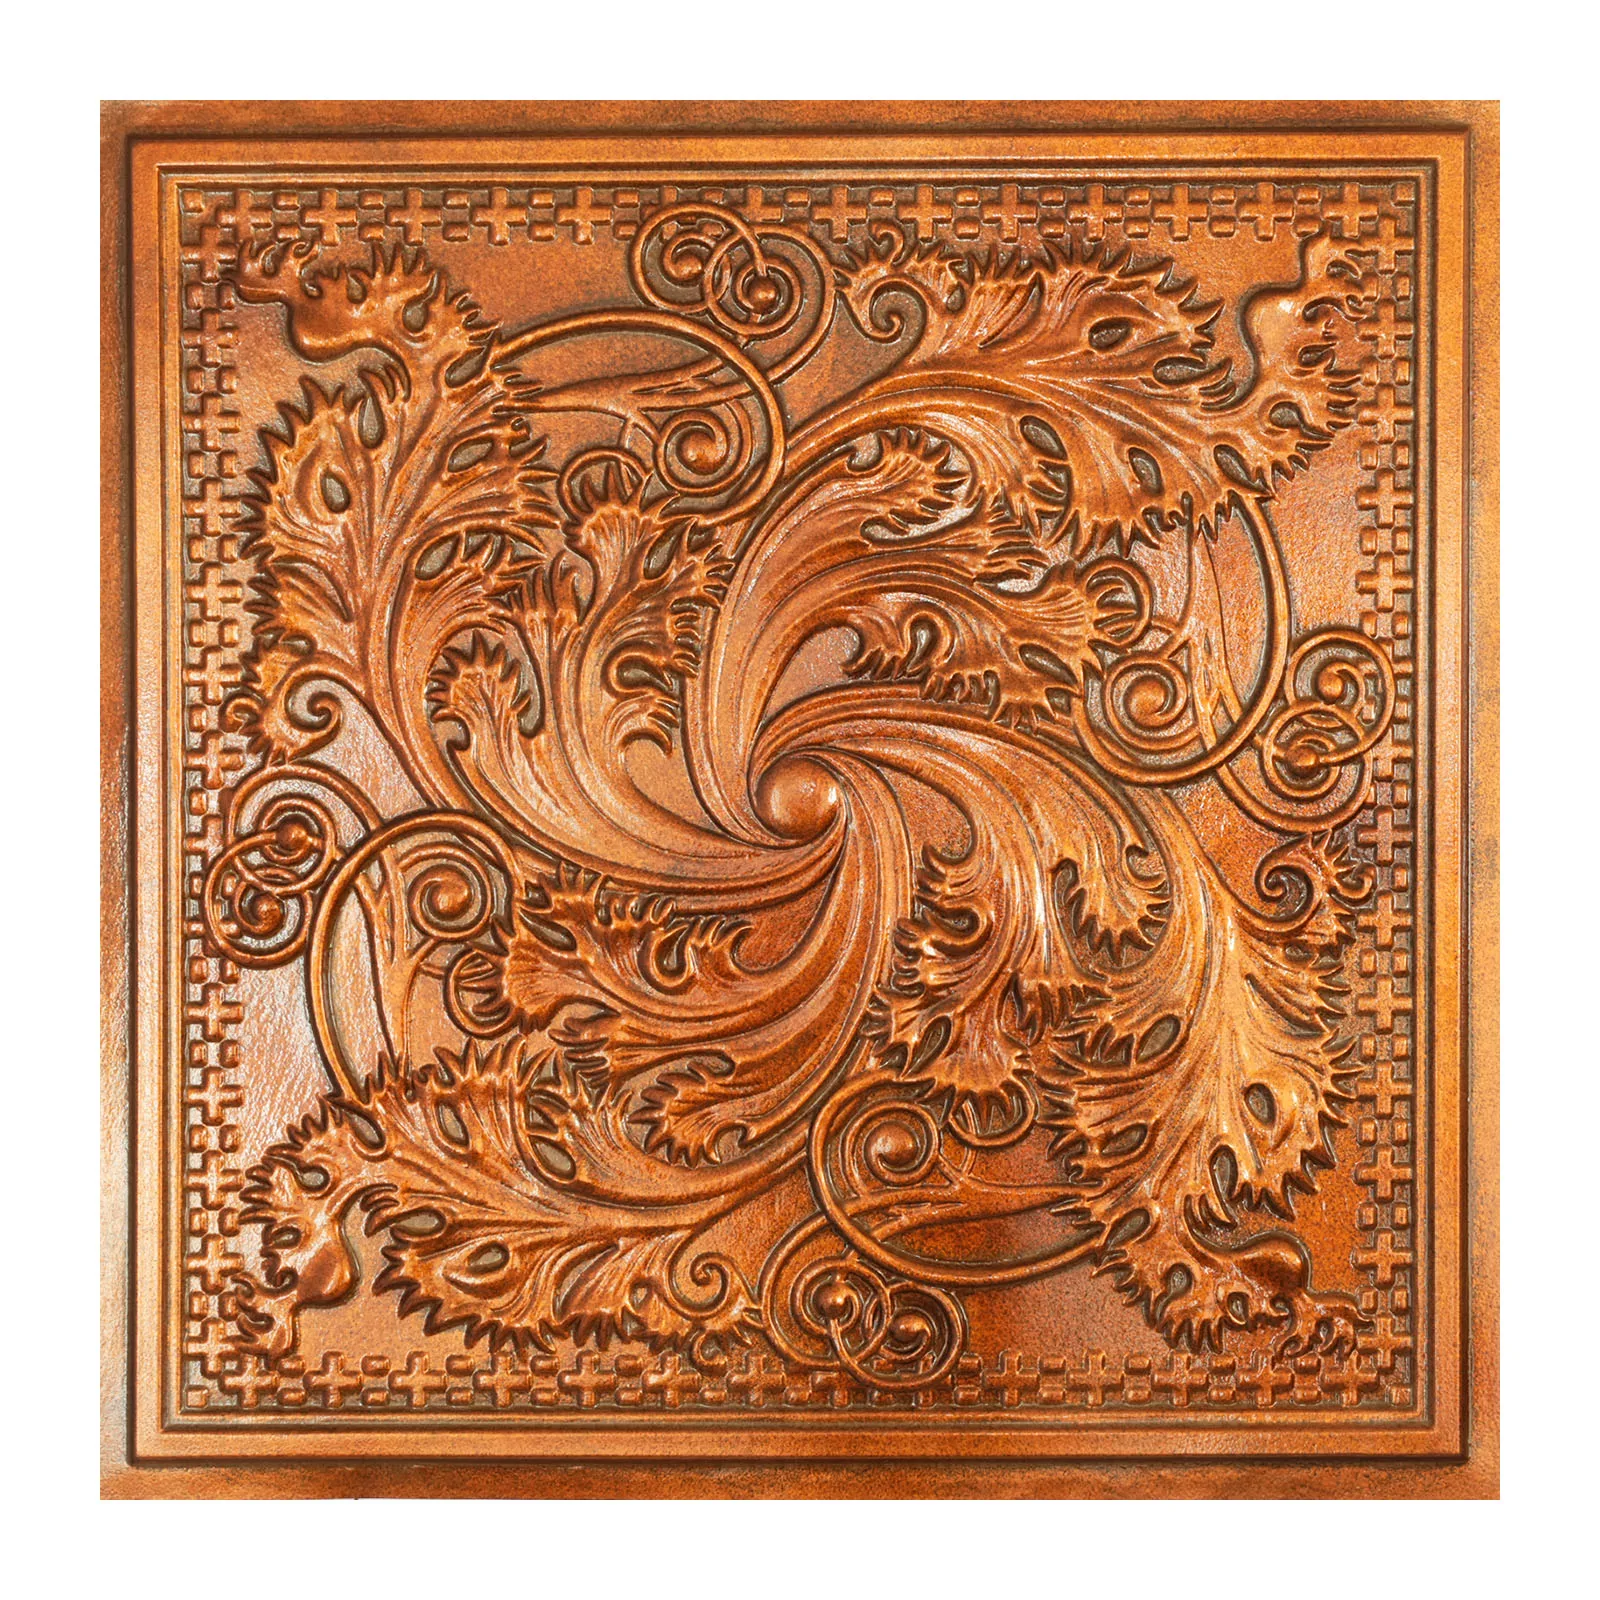 Faux tin ceiling tiles Art style 3D embossing wall panels PL62 archaic copper